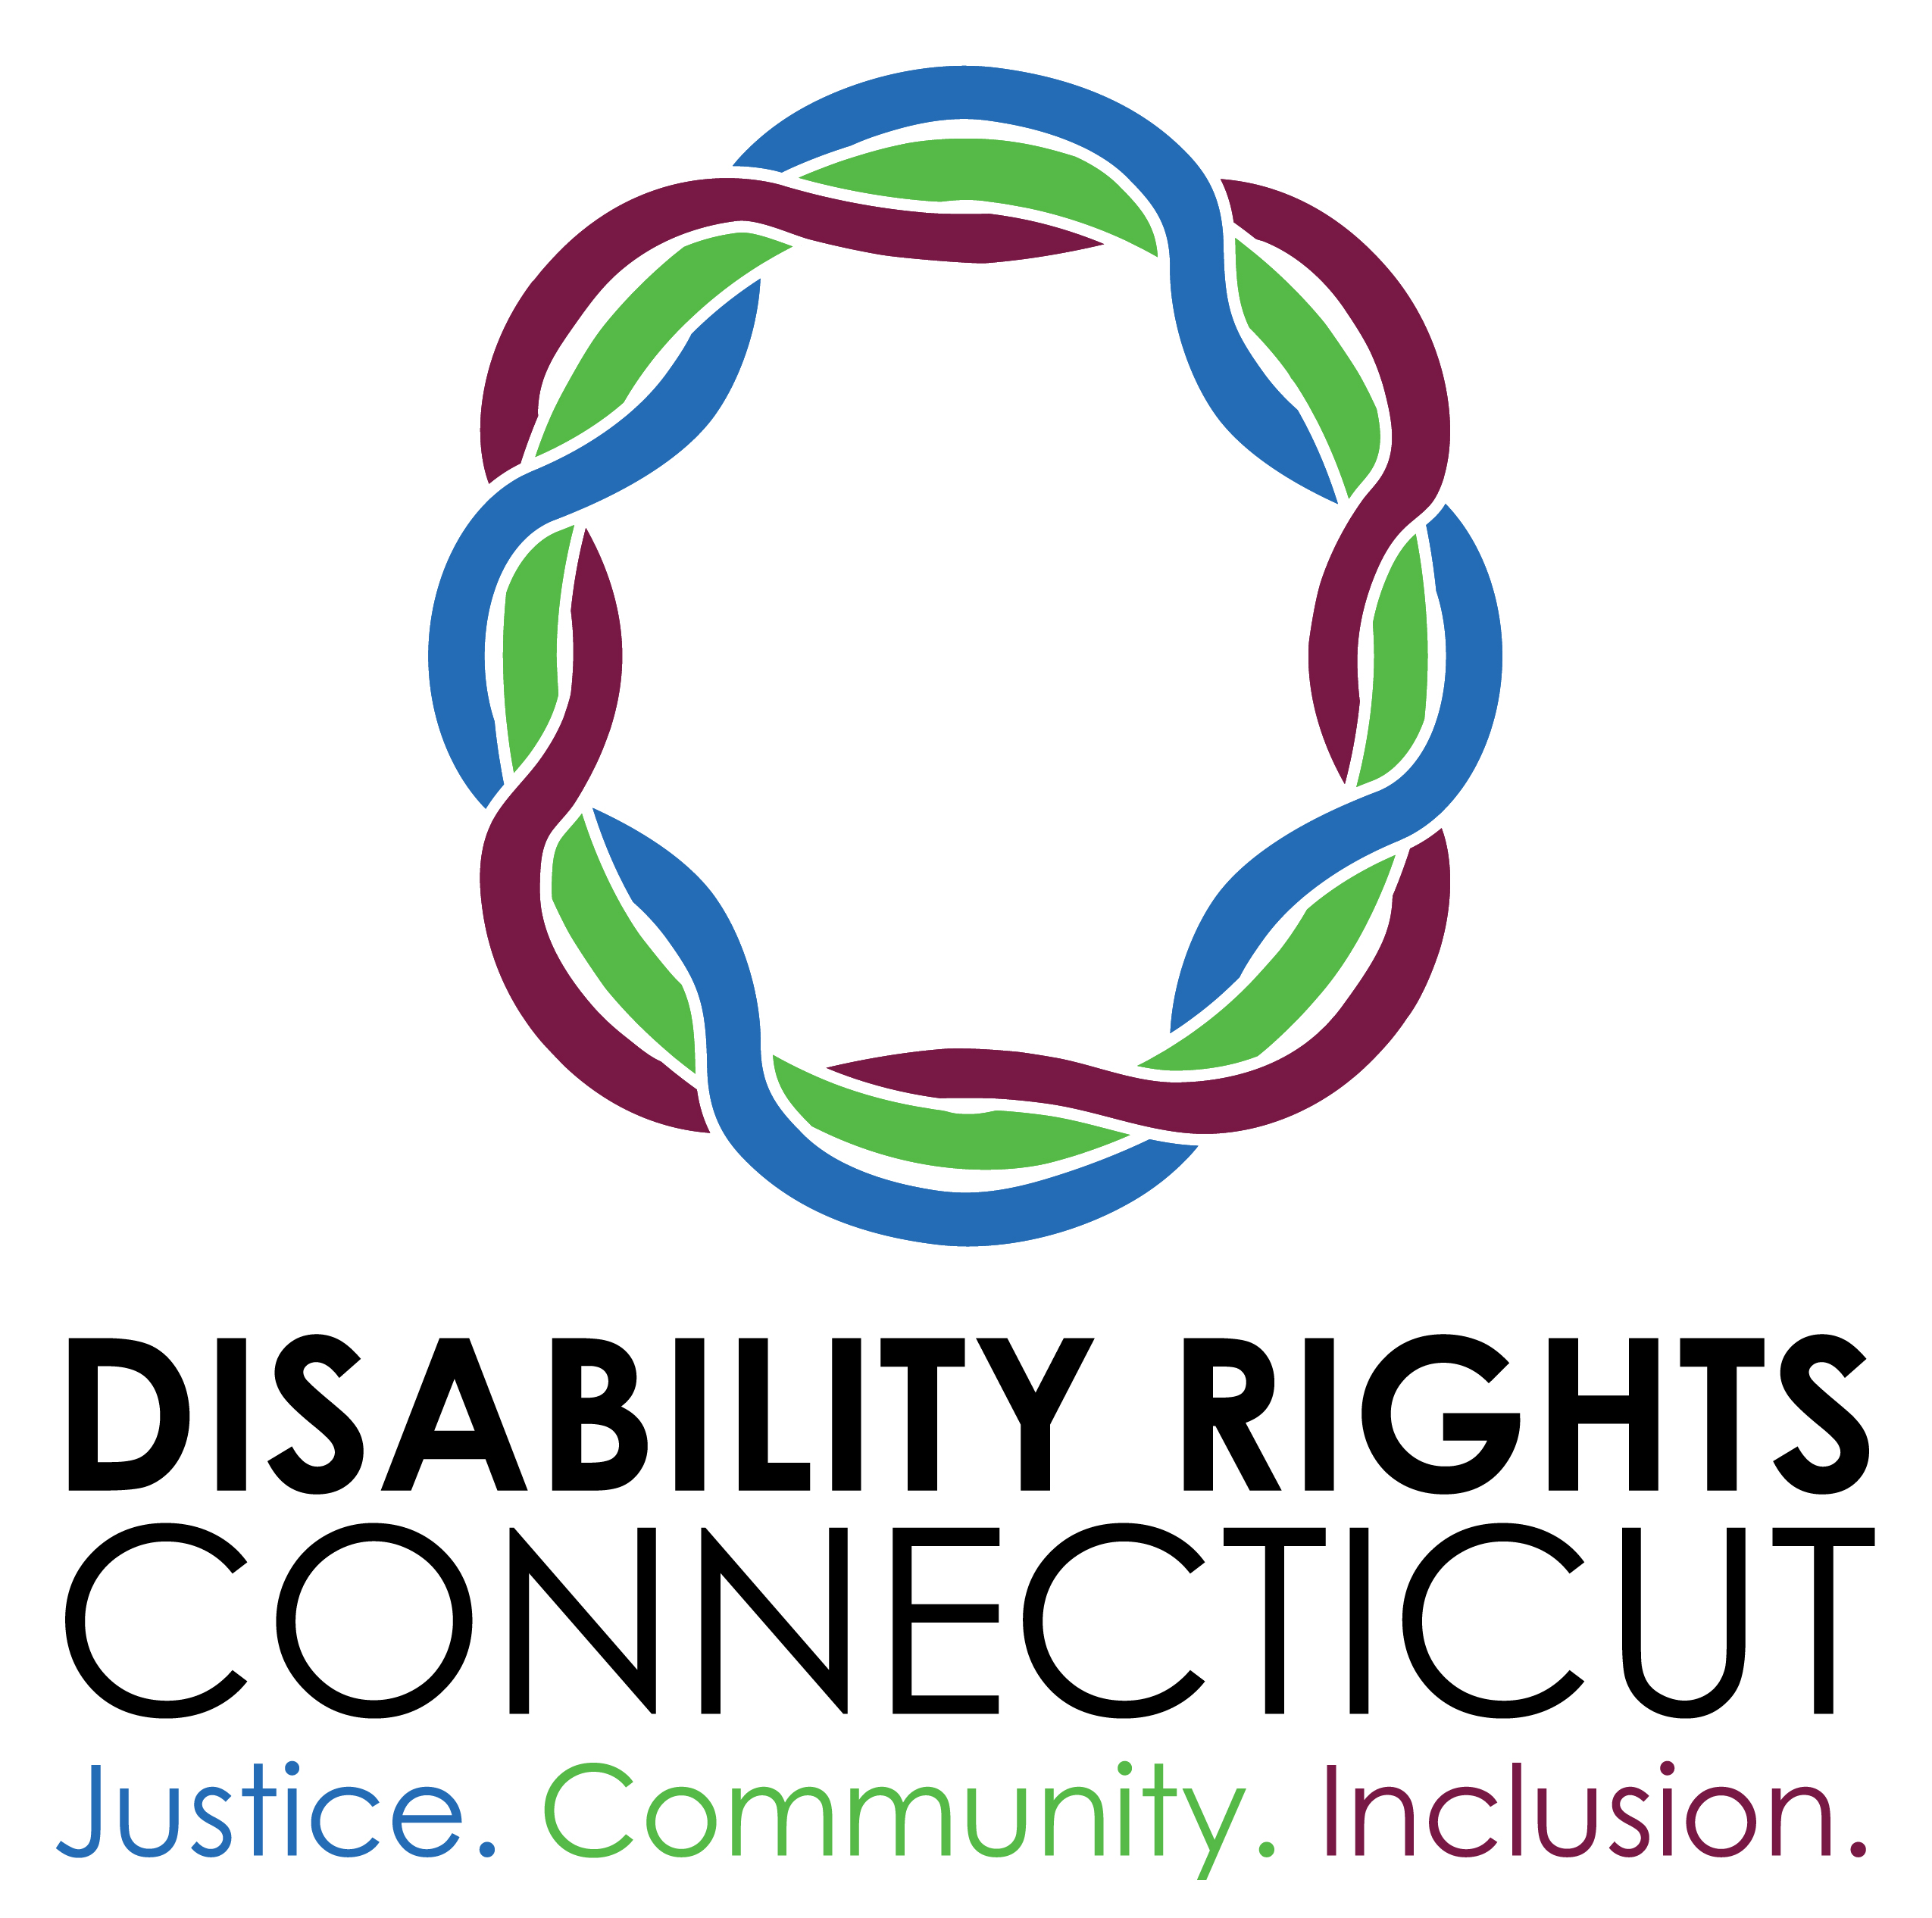 disability rights connecticut logo. Justice. Community. Inclusion. a weaved circle of blue, green, and burgandy 